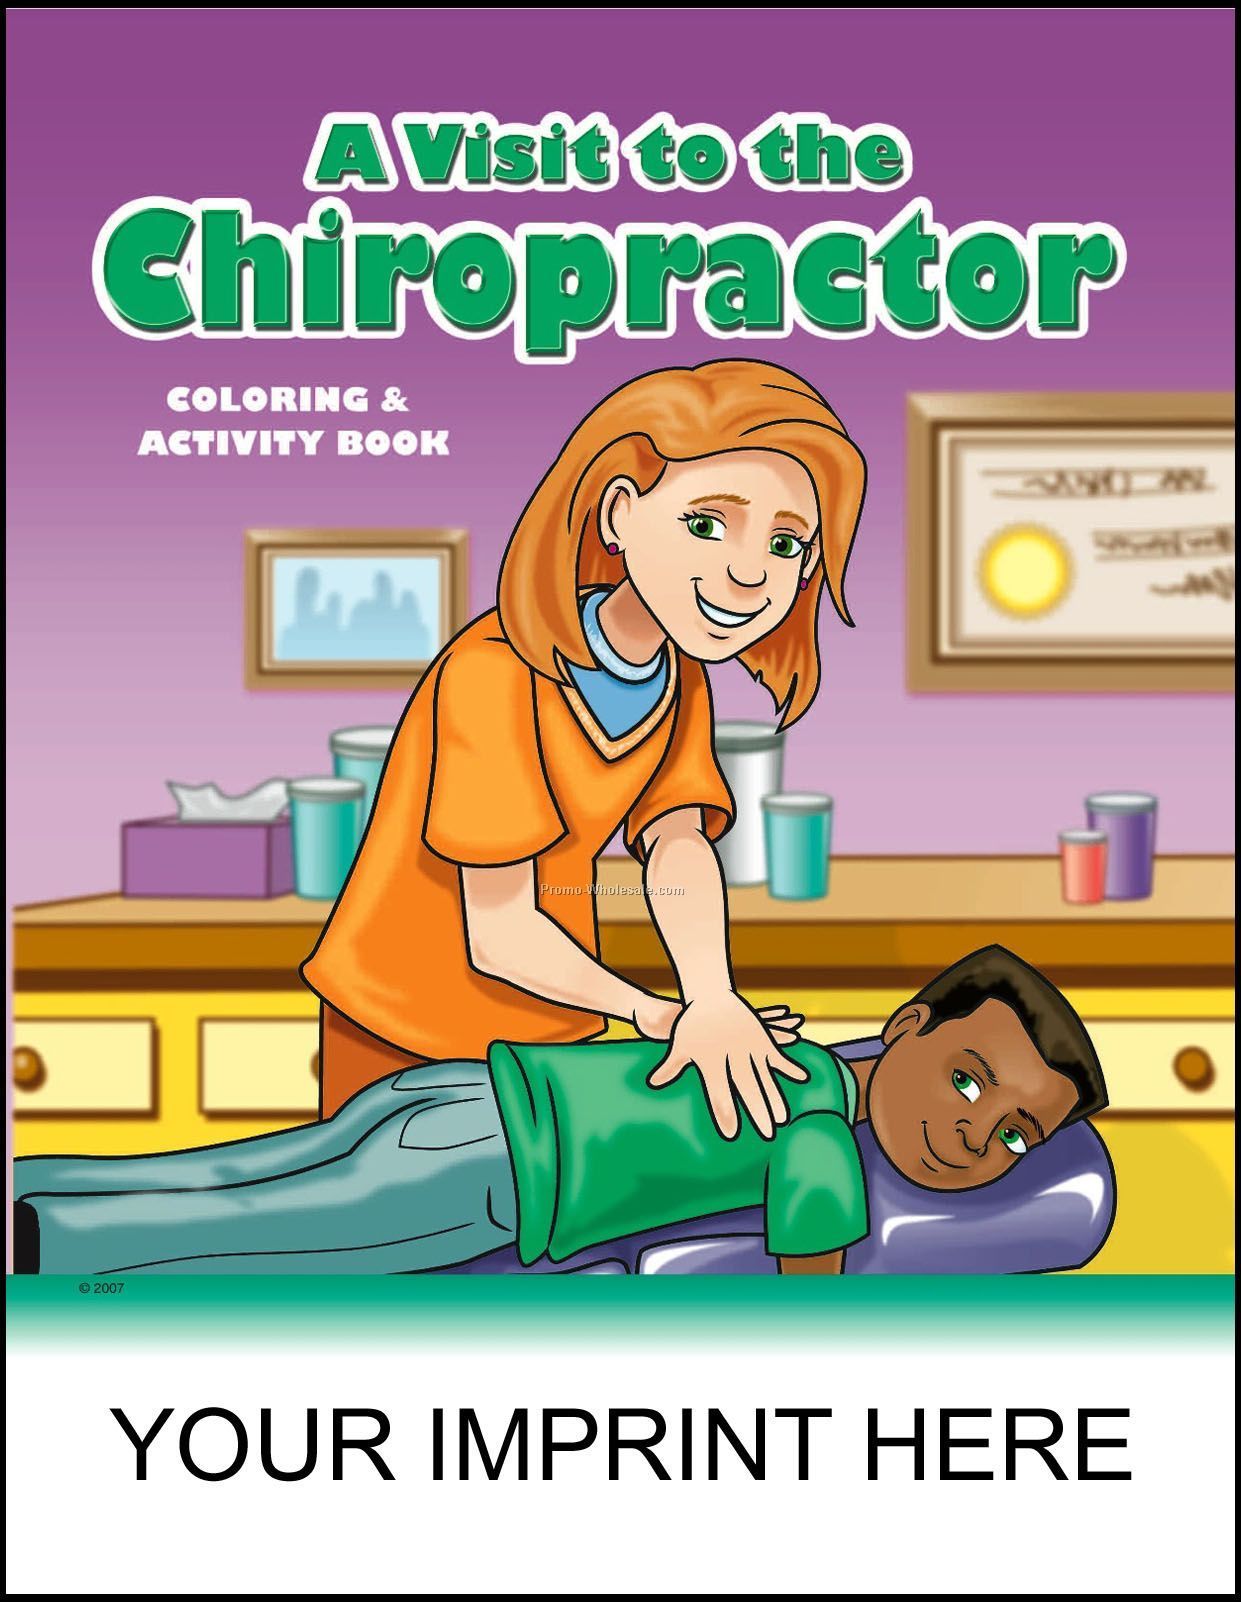 8-3/8"x10-7/8" A Visit To The Chiropractor Coloring & Activity Book